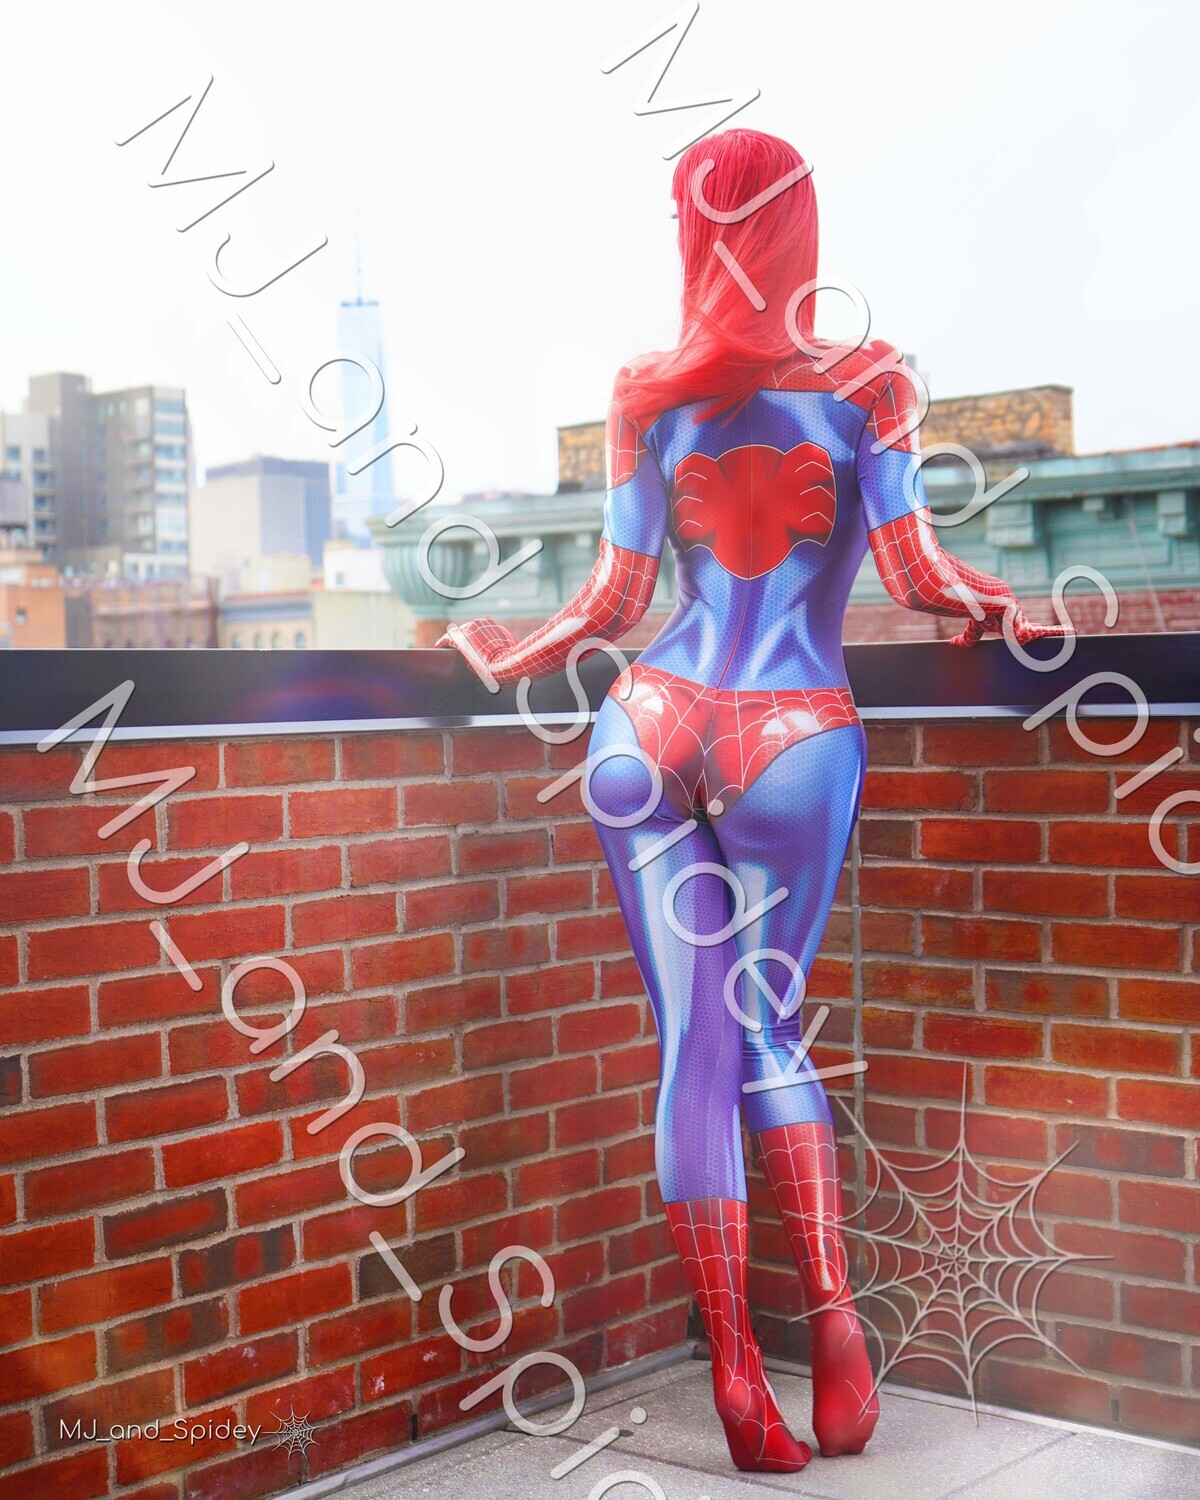 Marvel - Spider-Man - Mary Jane Watson - Classic Spider-Suit - NYC 3 - Digital Cosplay Image (@MJ_and_Spidey, MJ and Spidey, Comics)